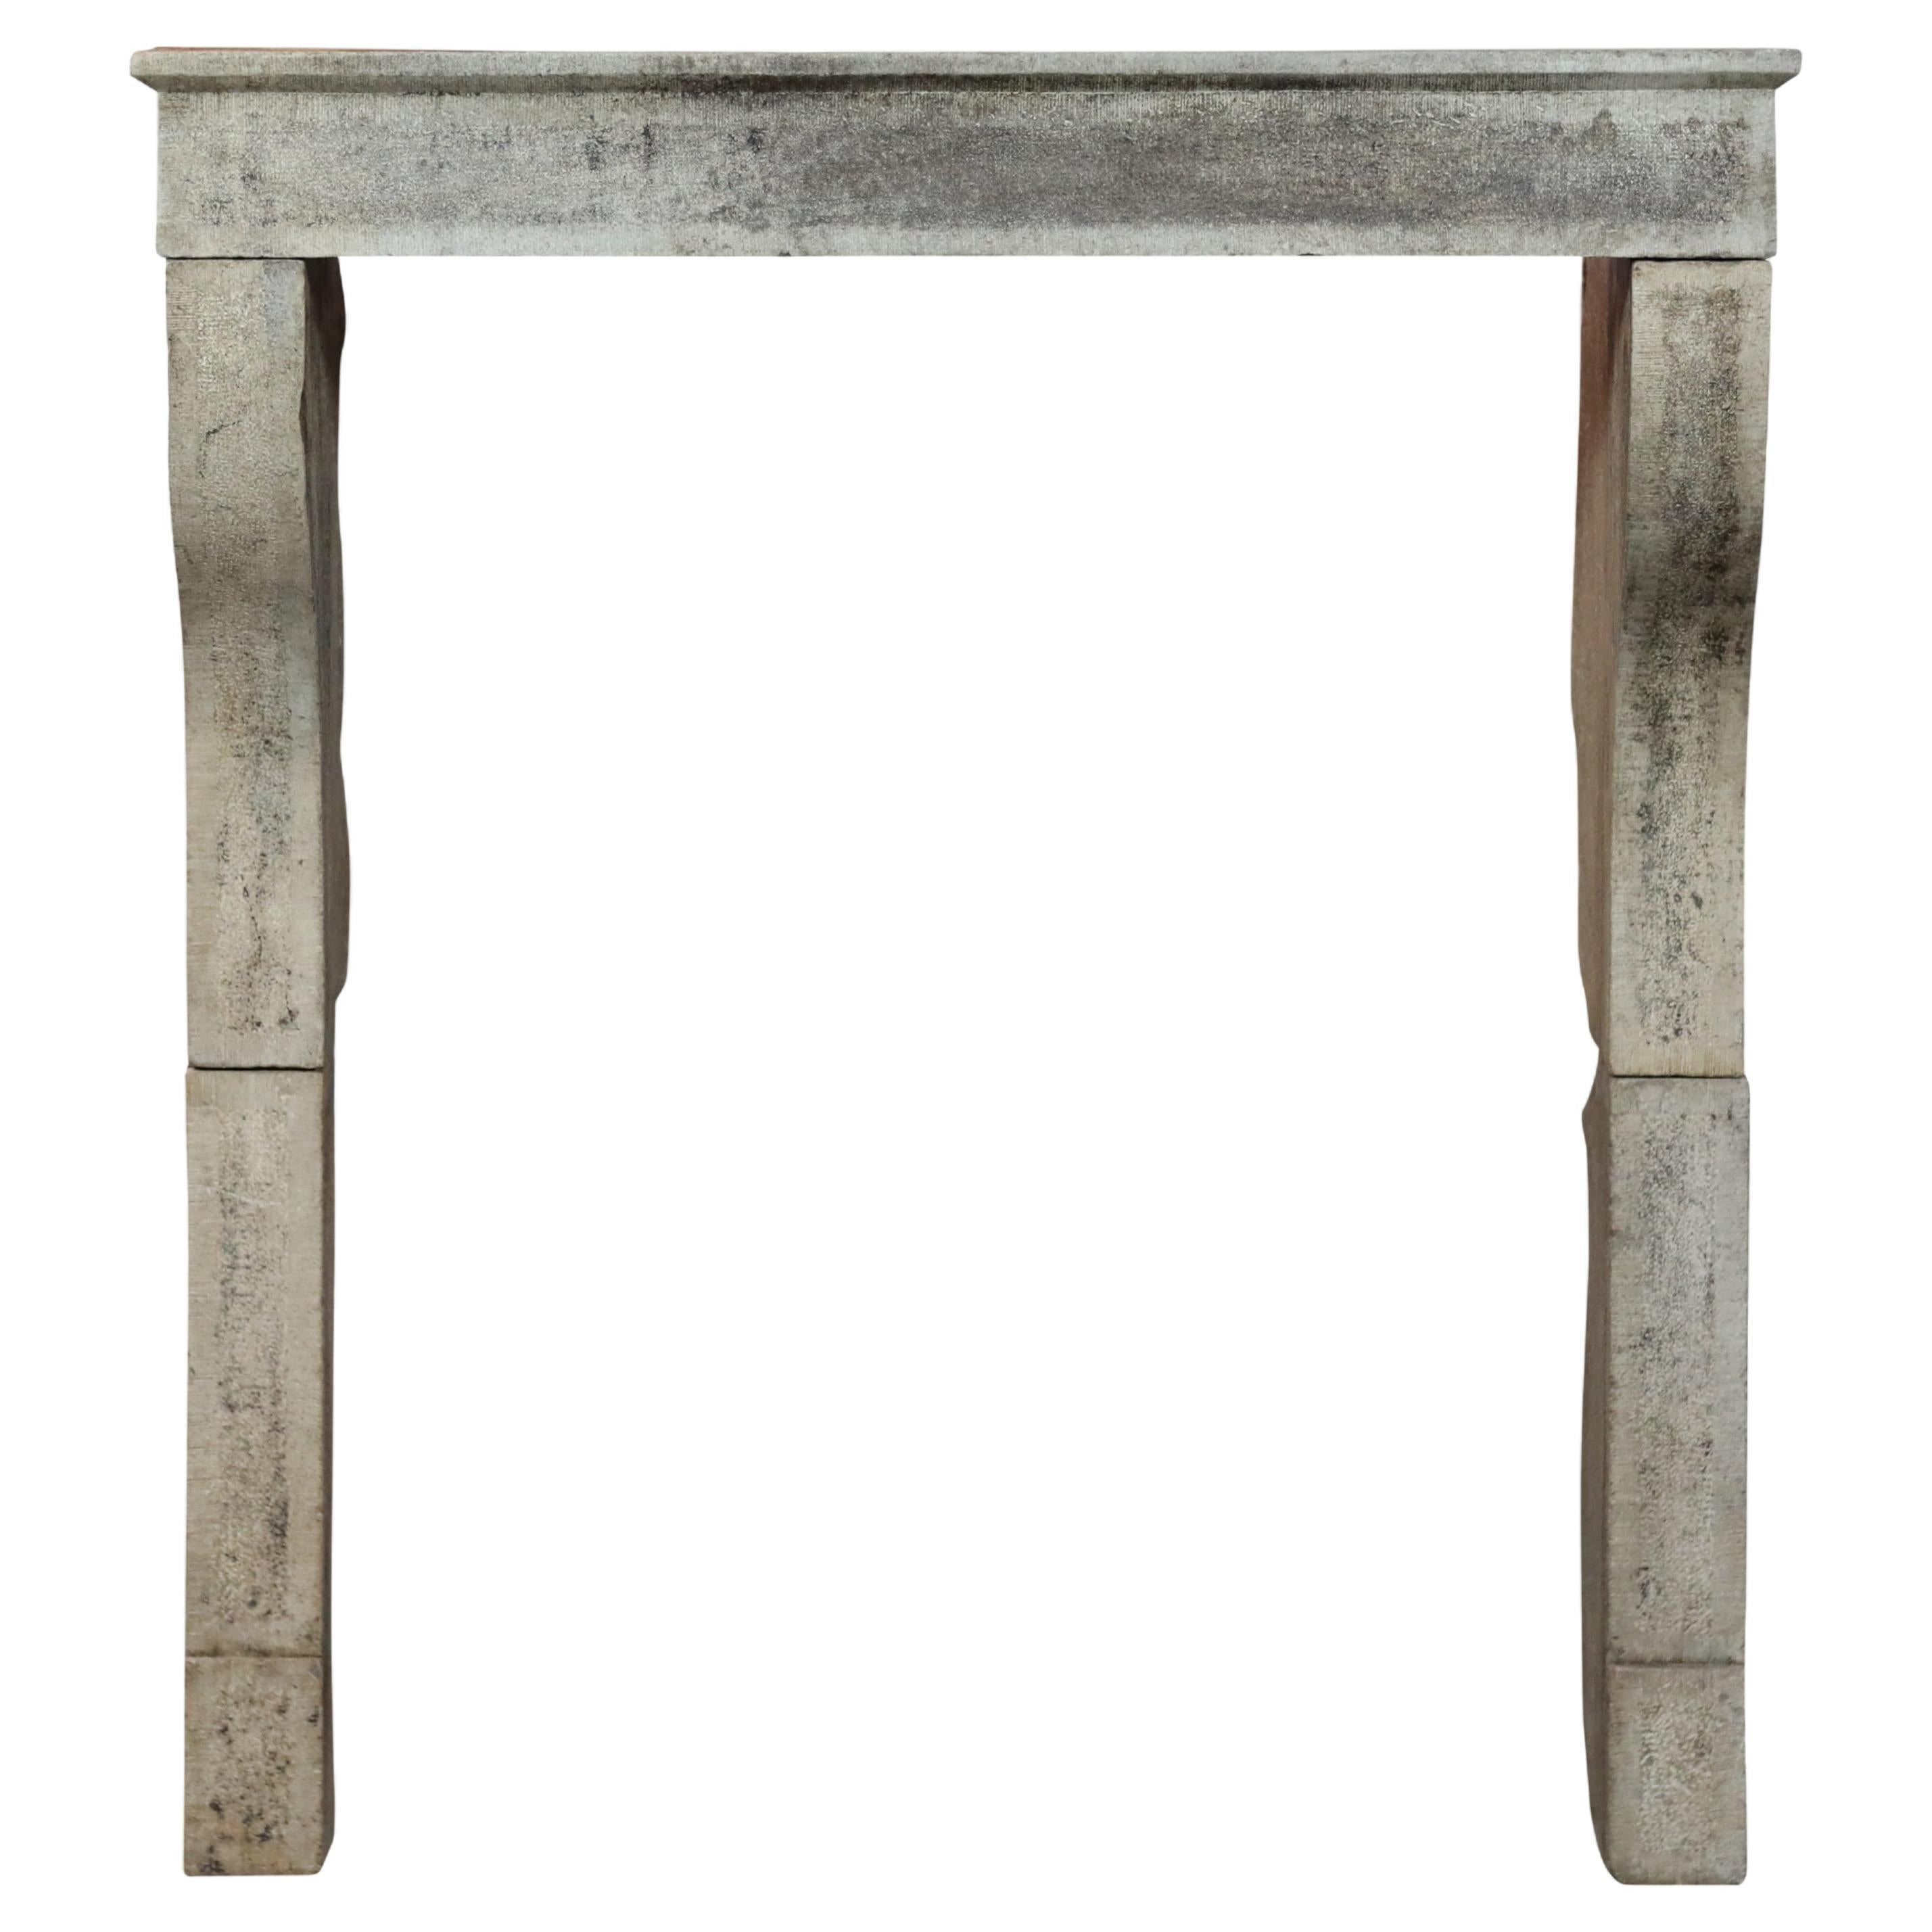 French Antique Kitchen Fireplace In Limestone With Original Patina For Sale